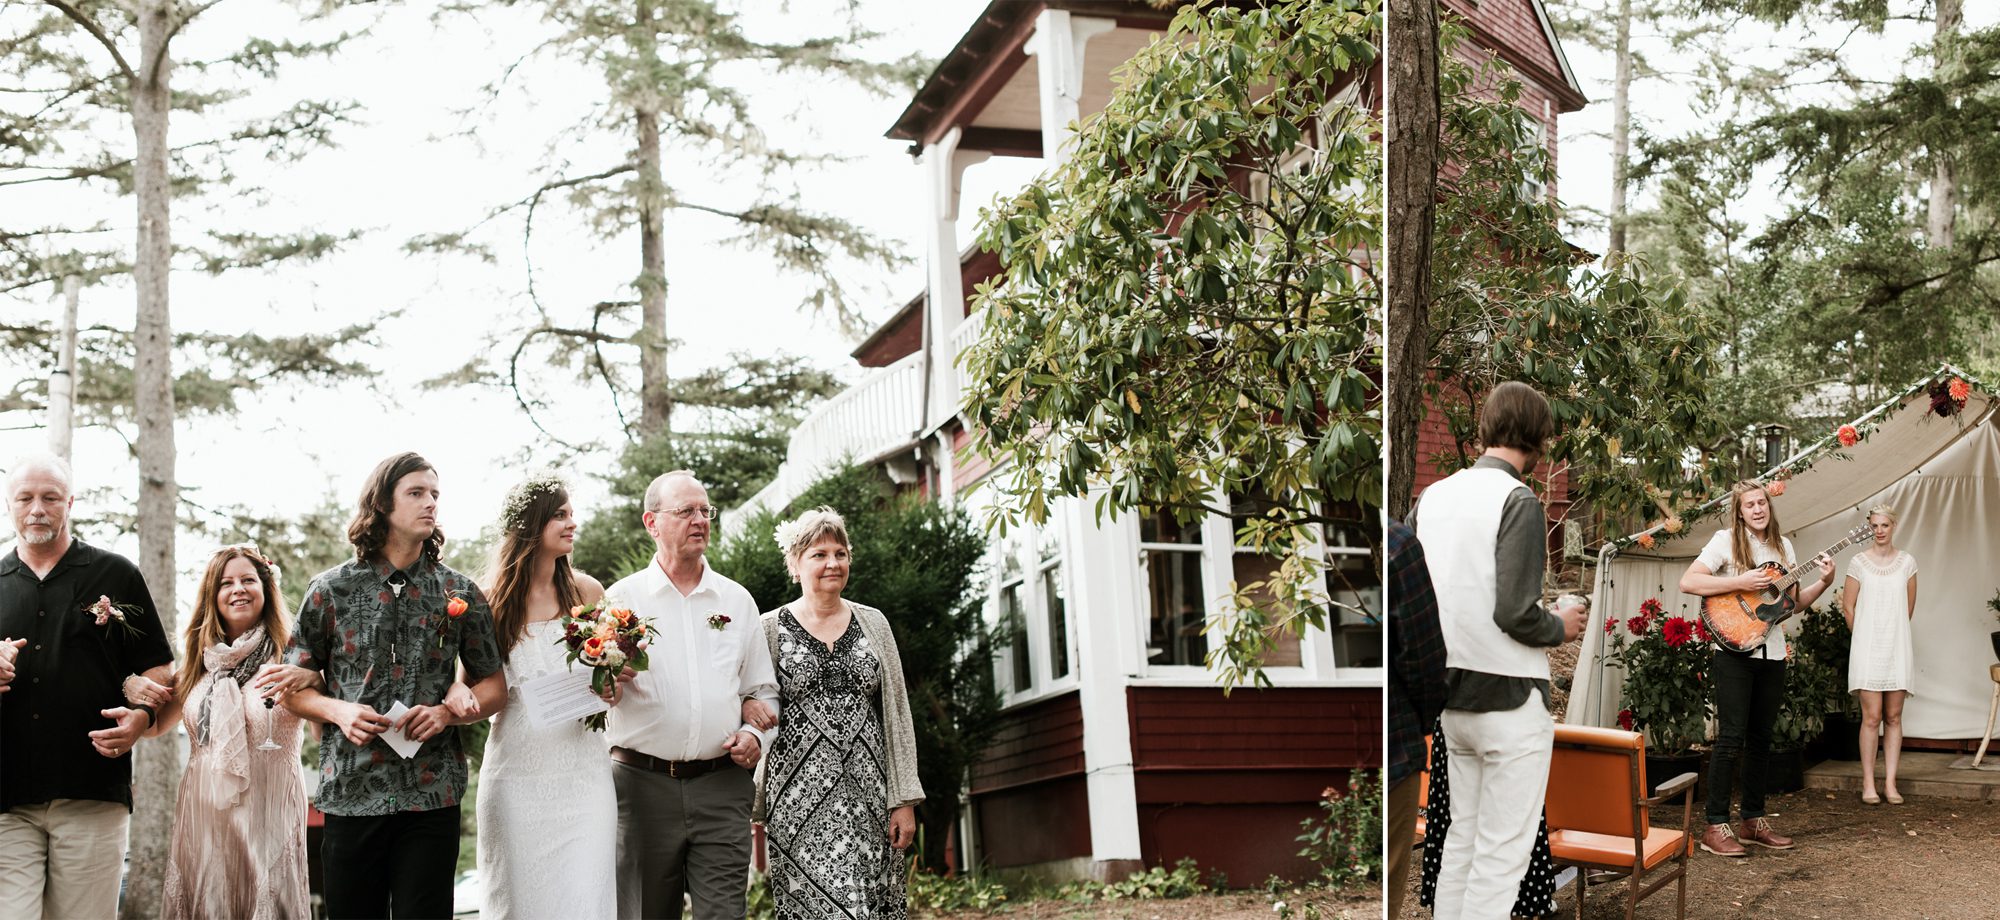 The bride and groom approach the ceremony while their friends plays the guitar. By Long Beach, Washington wedding photographer Briana Morrison